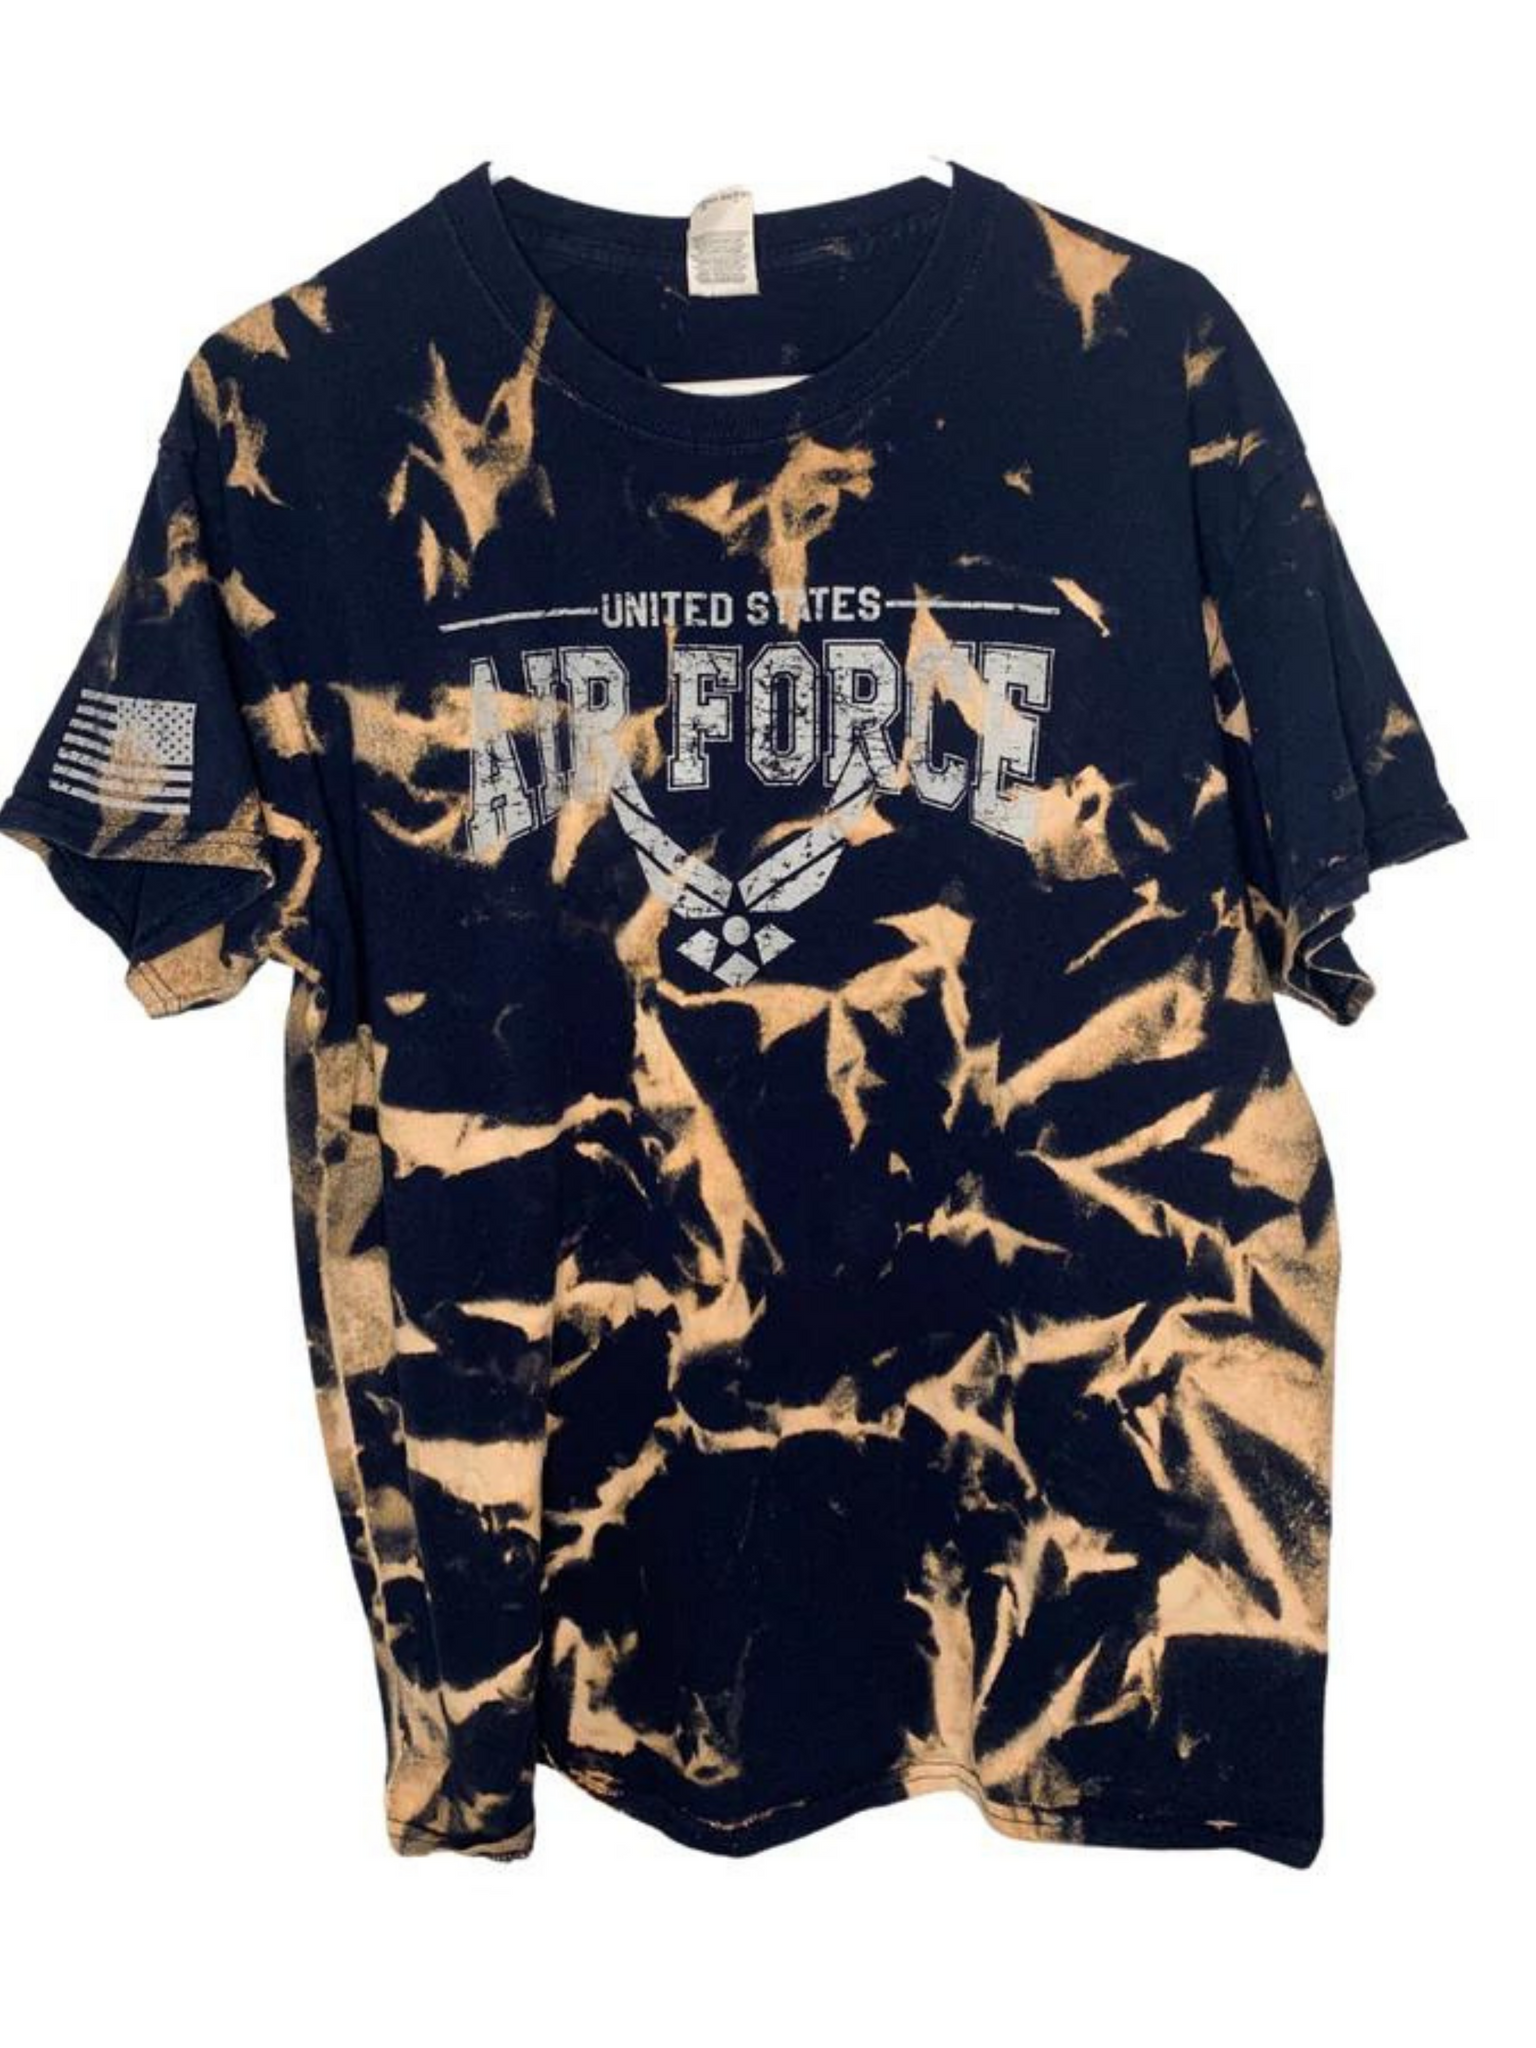 United States Air Force Bleached Shirt